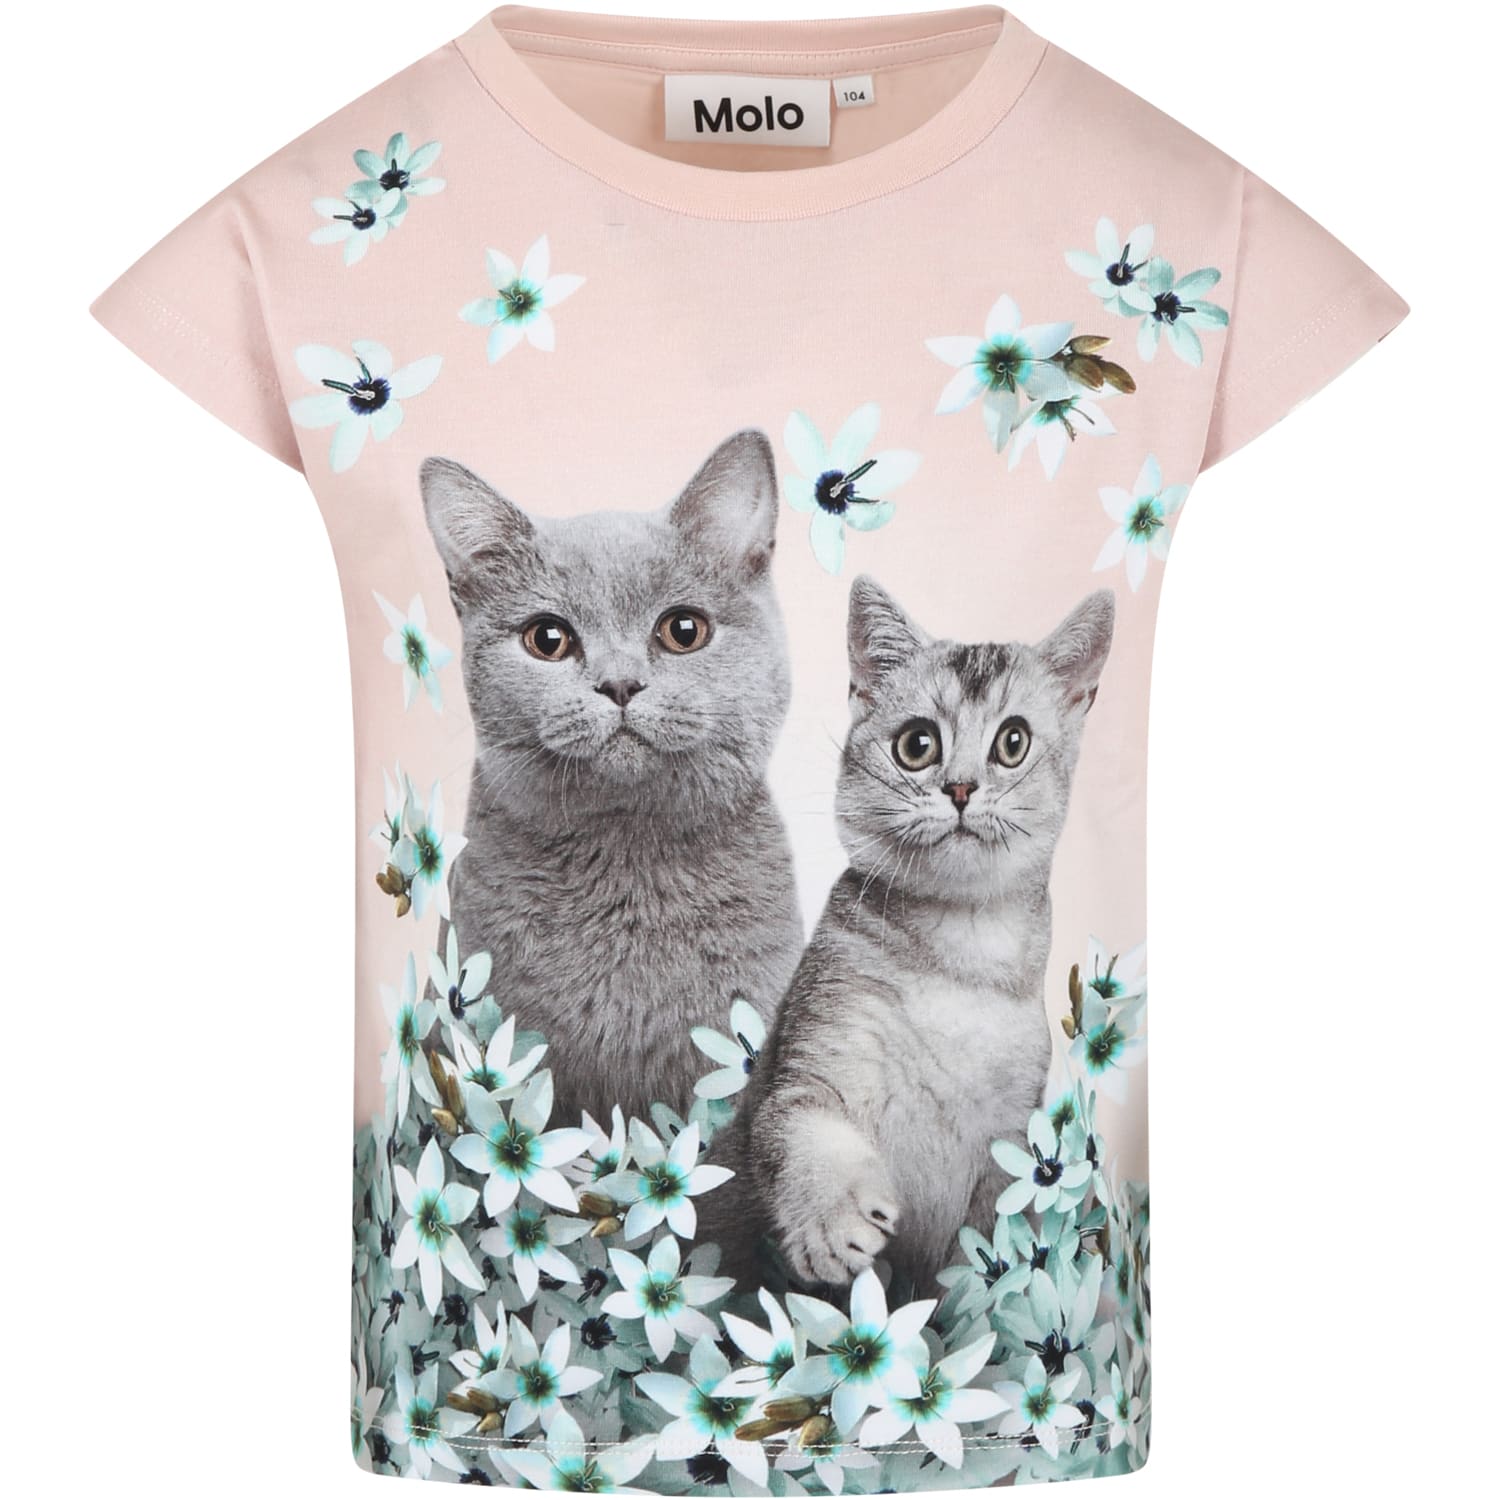 MOLO PINK T-SHIRT FOR GIRL WITH CATS AND FLOWERS